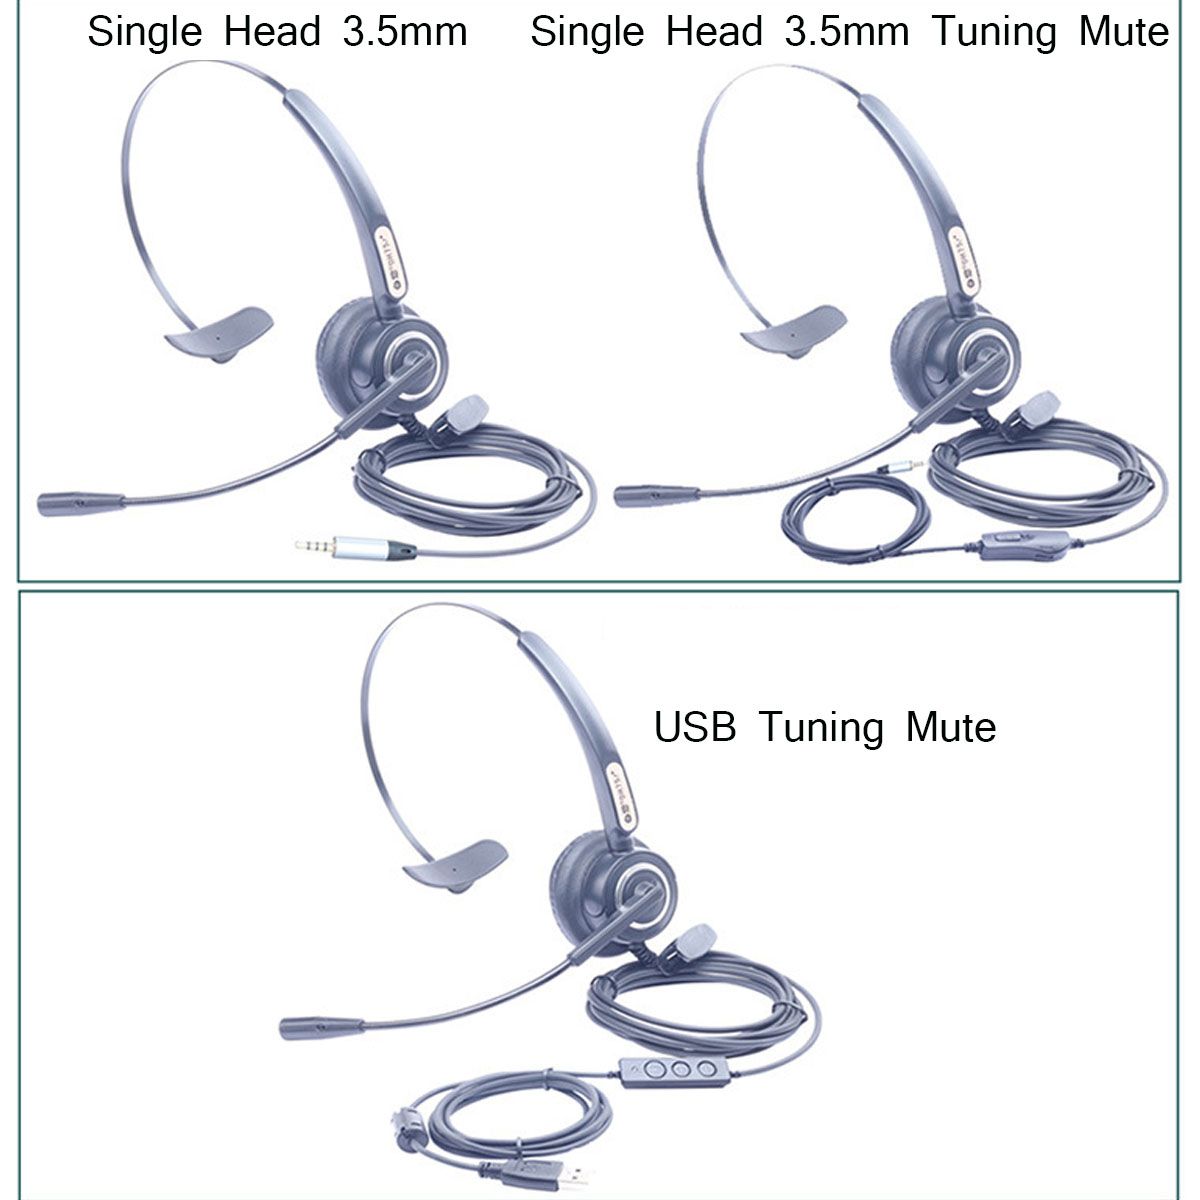 35mm-USB-Headset-Computer-Headphones-Noise-Reduction-Microphone-for-PC-Laptop-Mobile-Phone-1698010